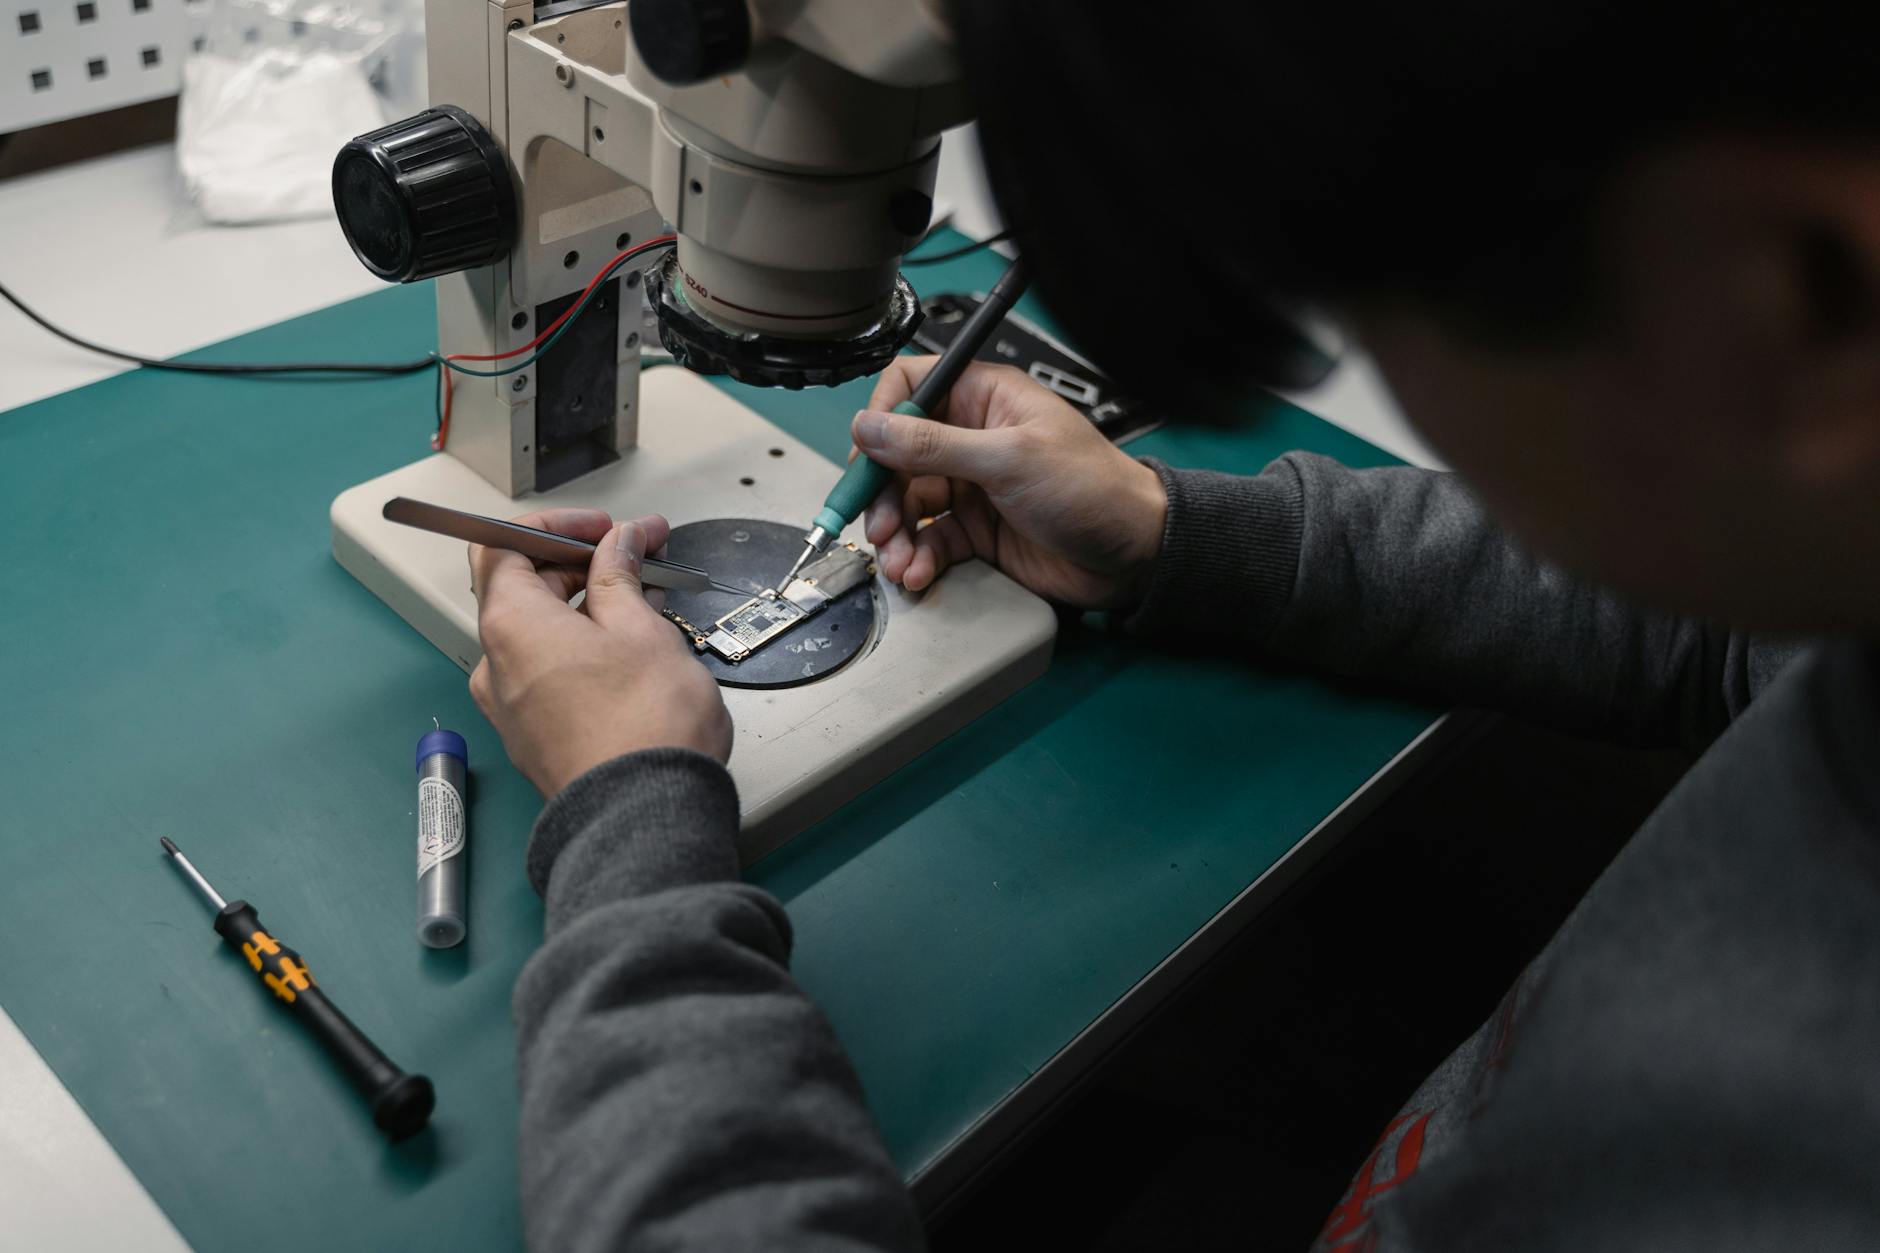 a person repairing the board on the microscope